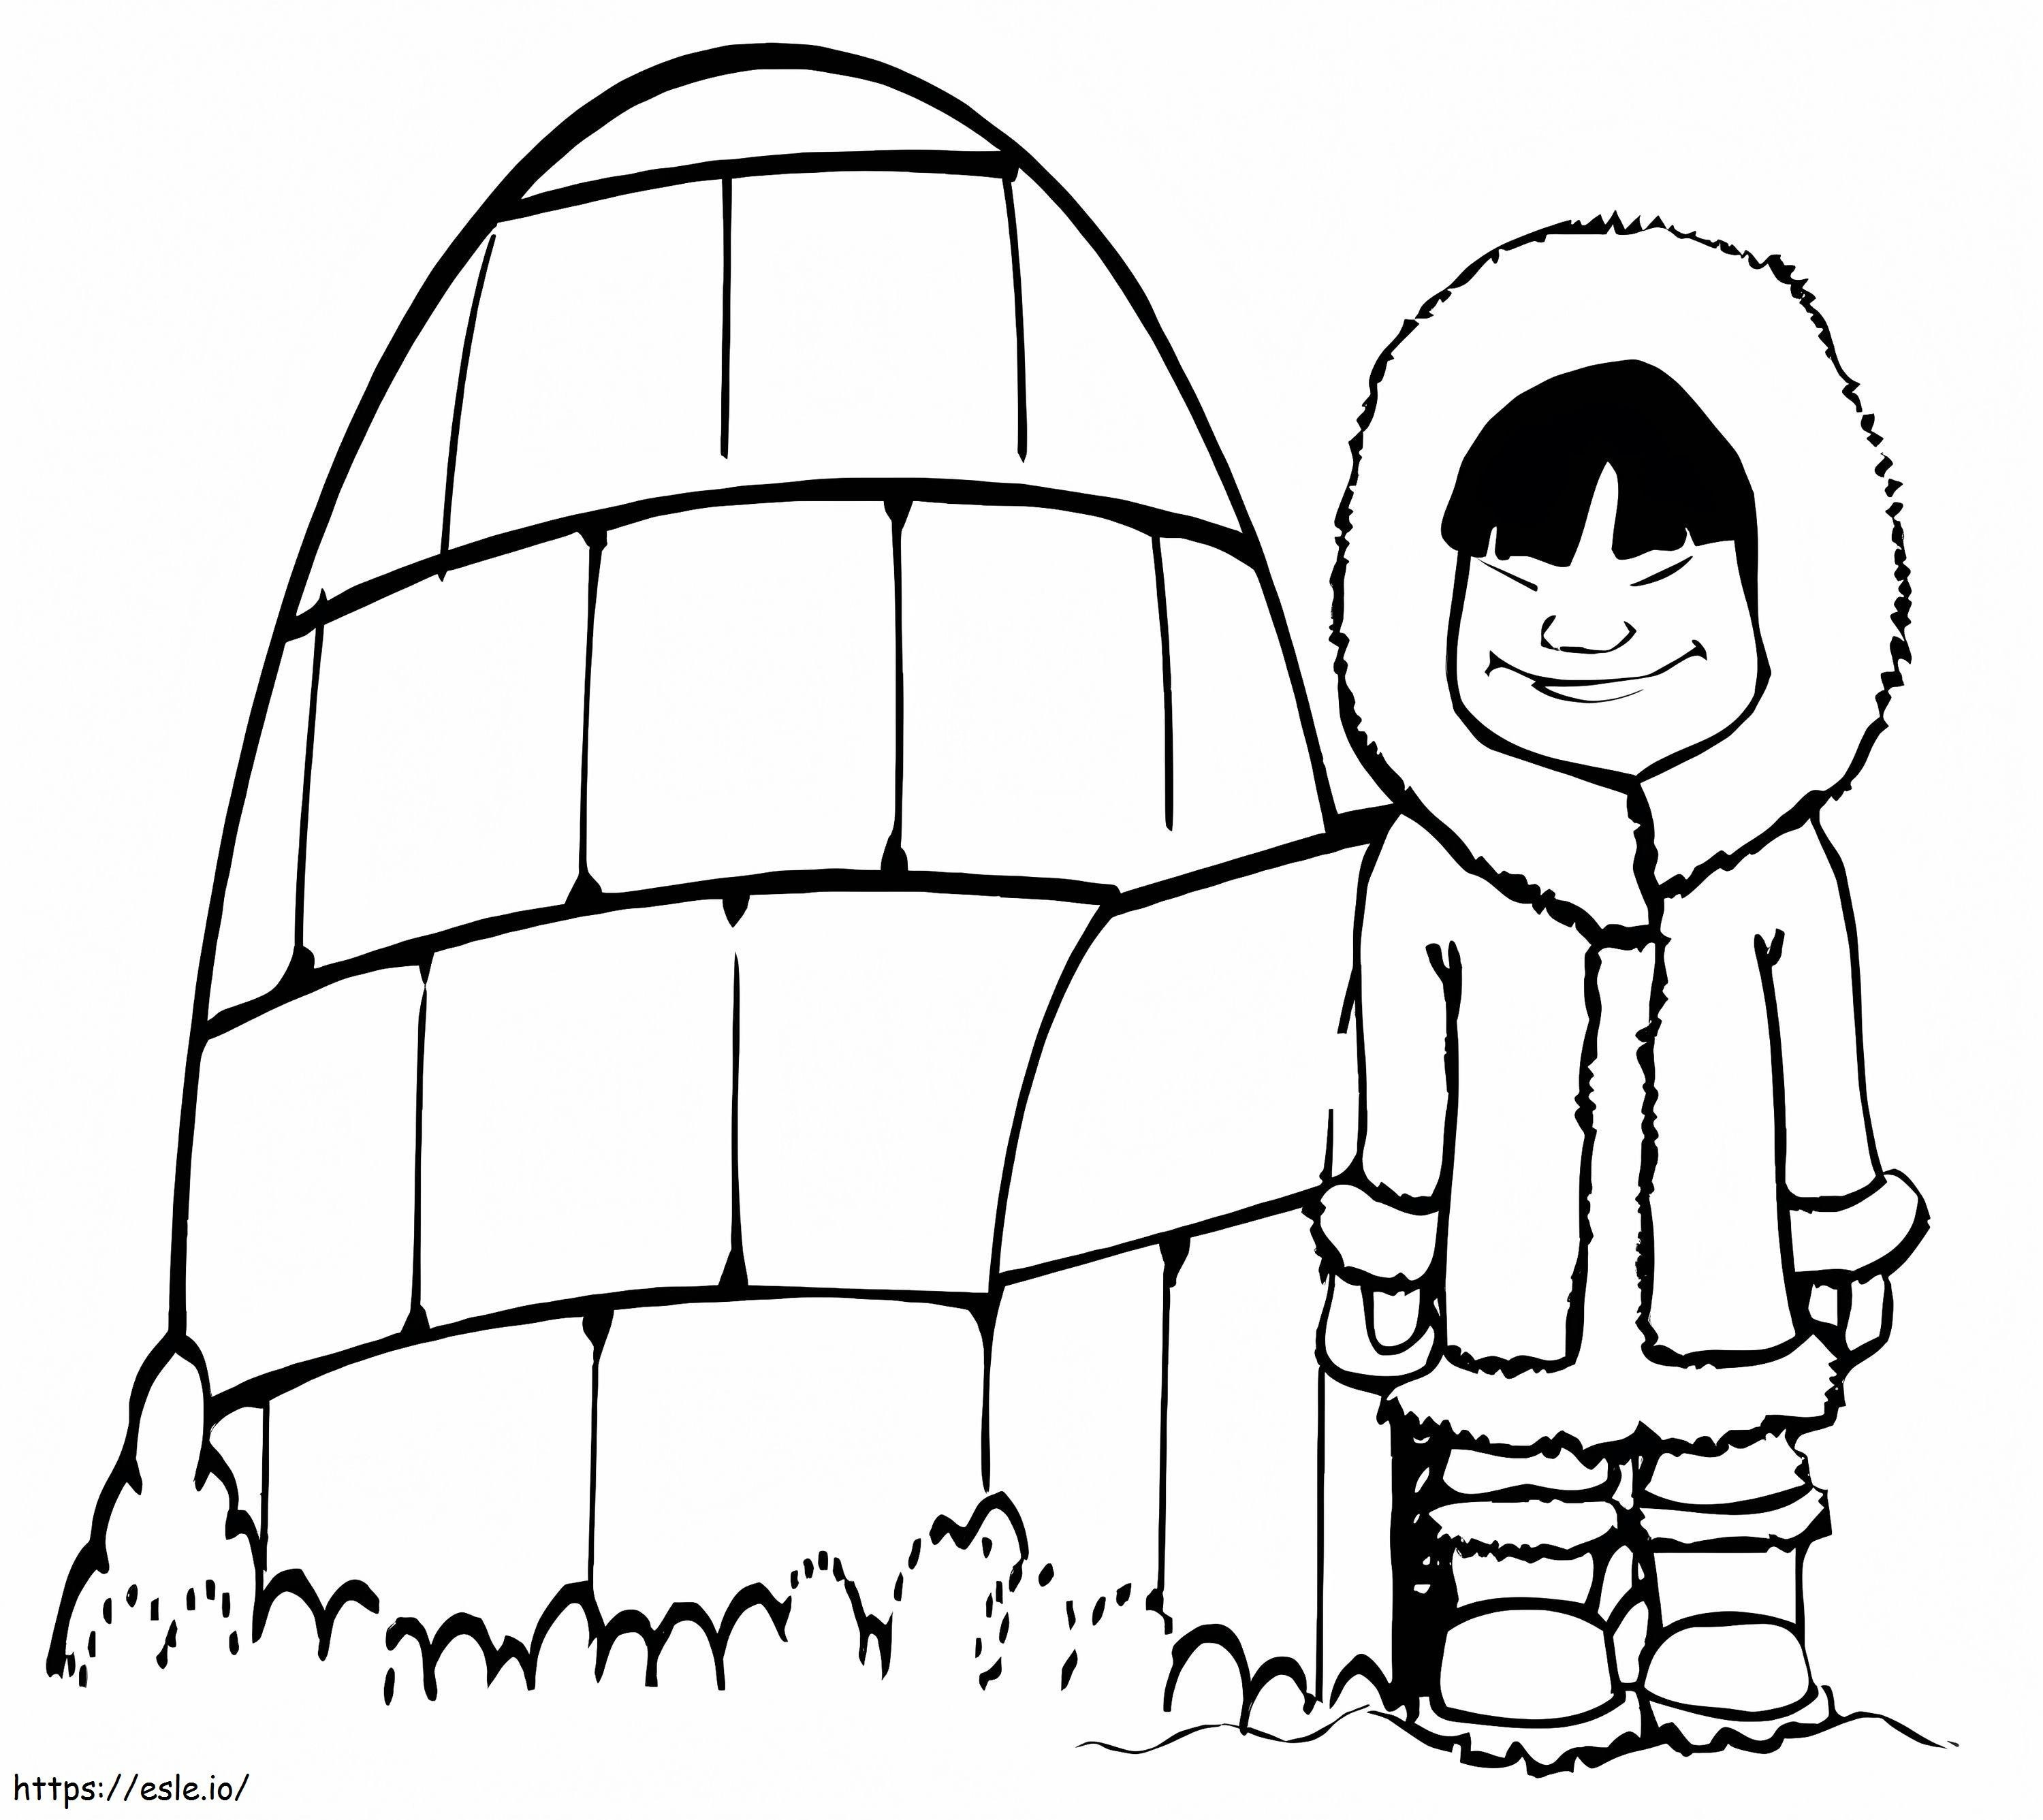 Smiling Boy With Iglu coloring page